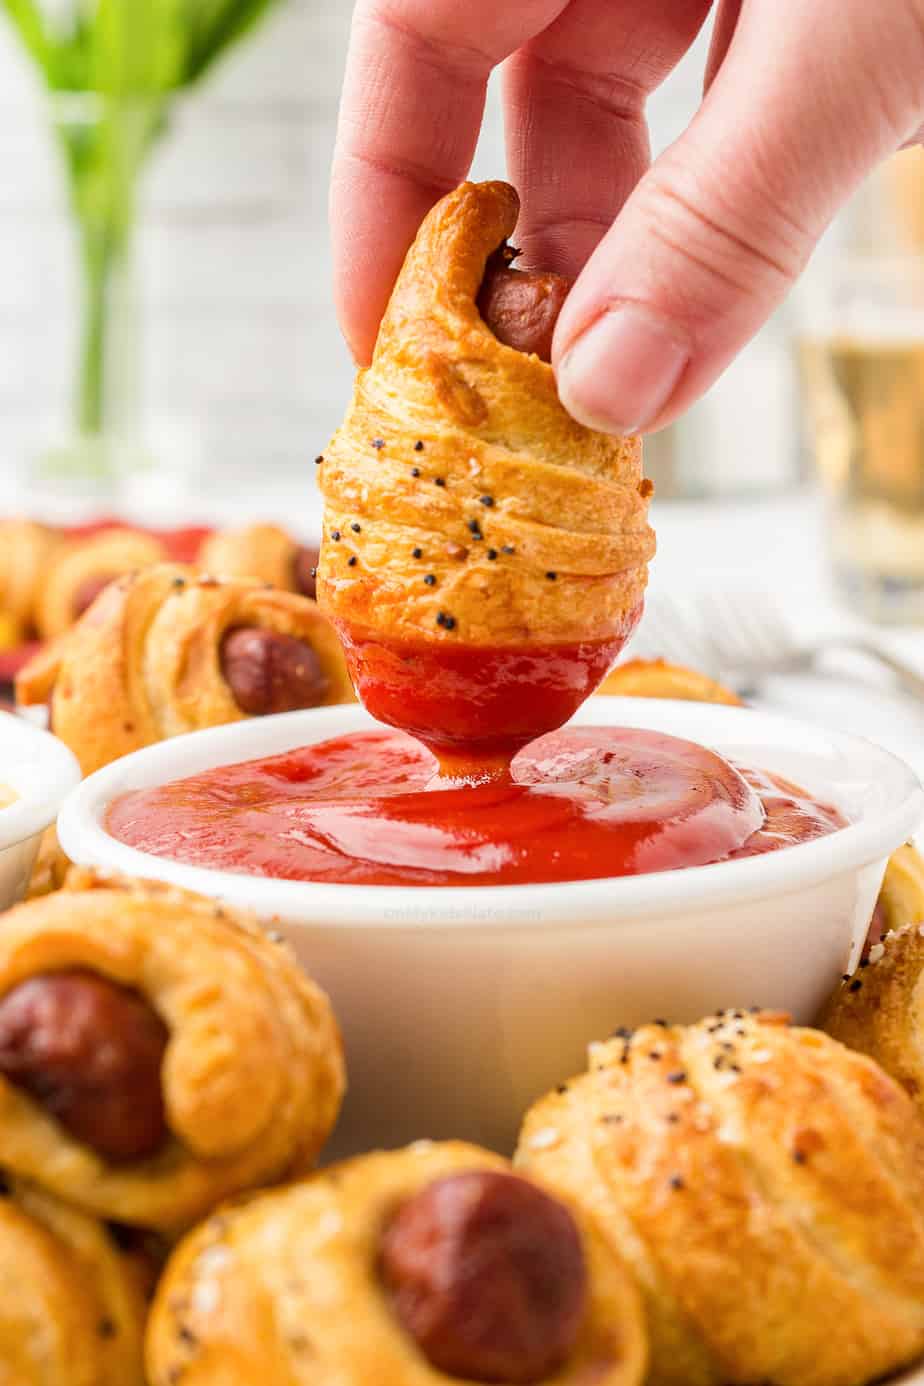 Dough wrapped sausage being dipped into ketchup in a bowl on a platter of pigs in a blanket